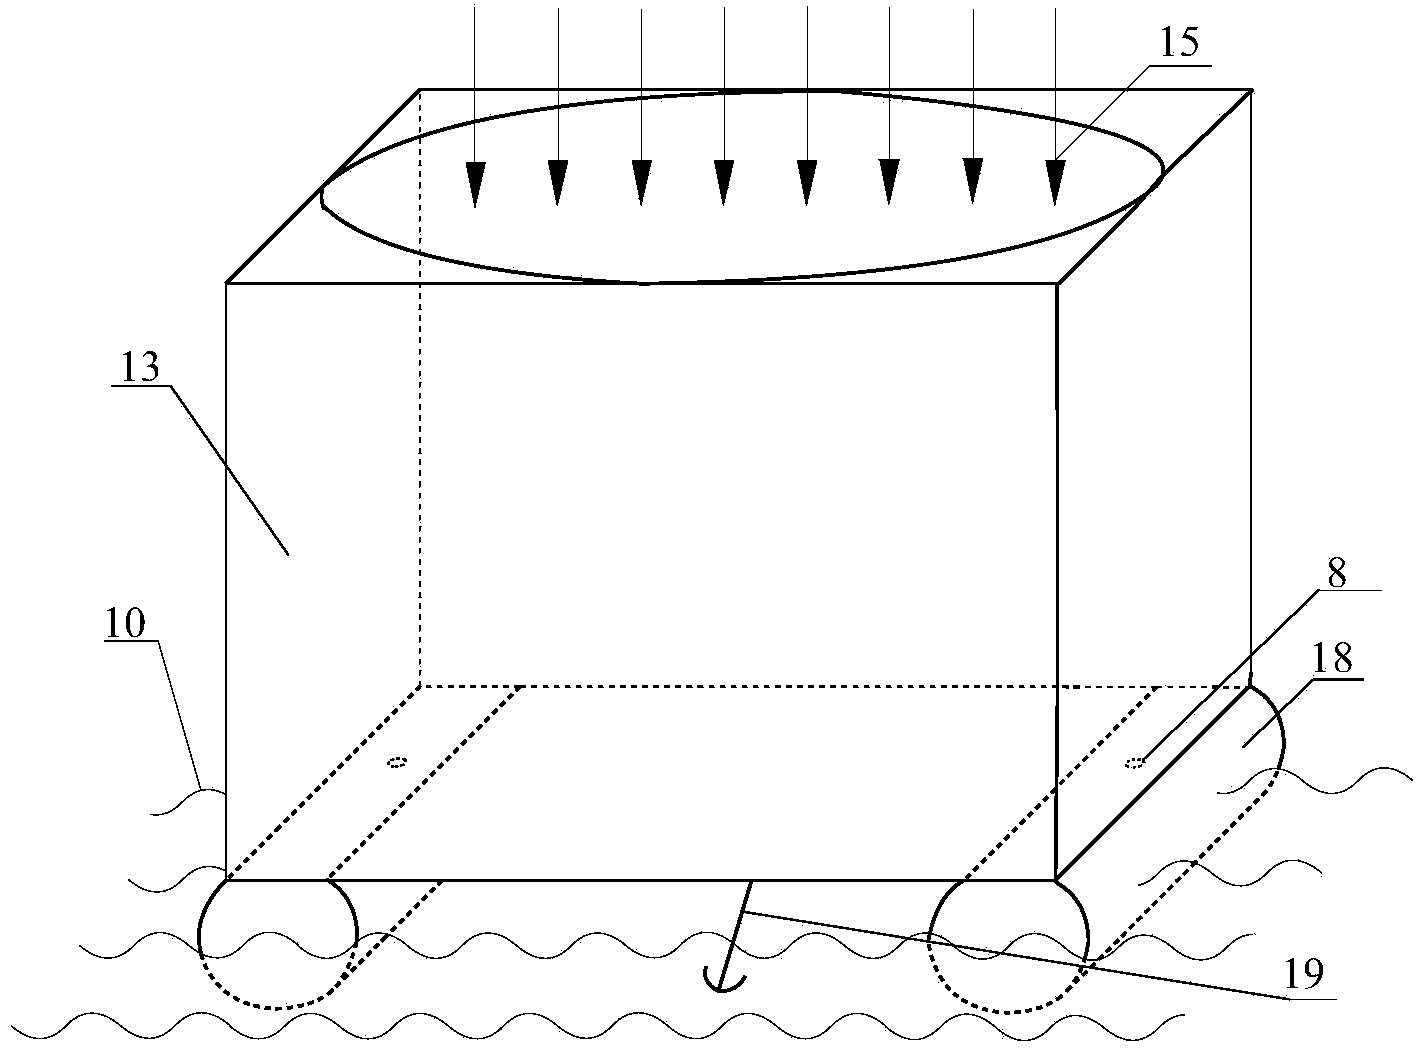 Solar energy sea water desalinization device based on reflection and total reflection